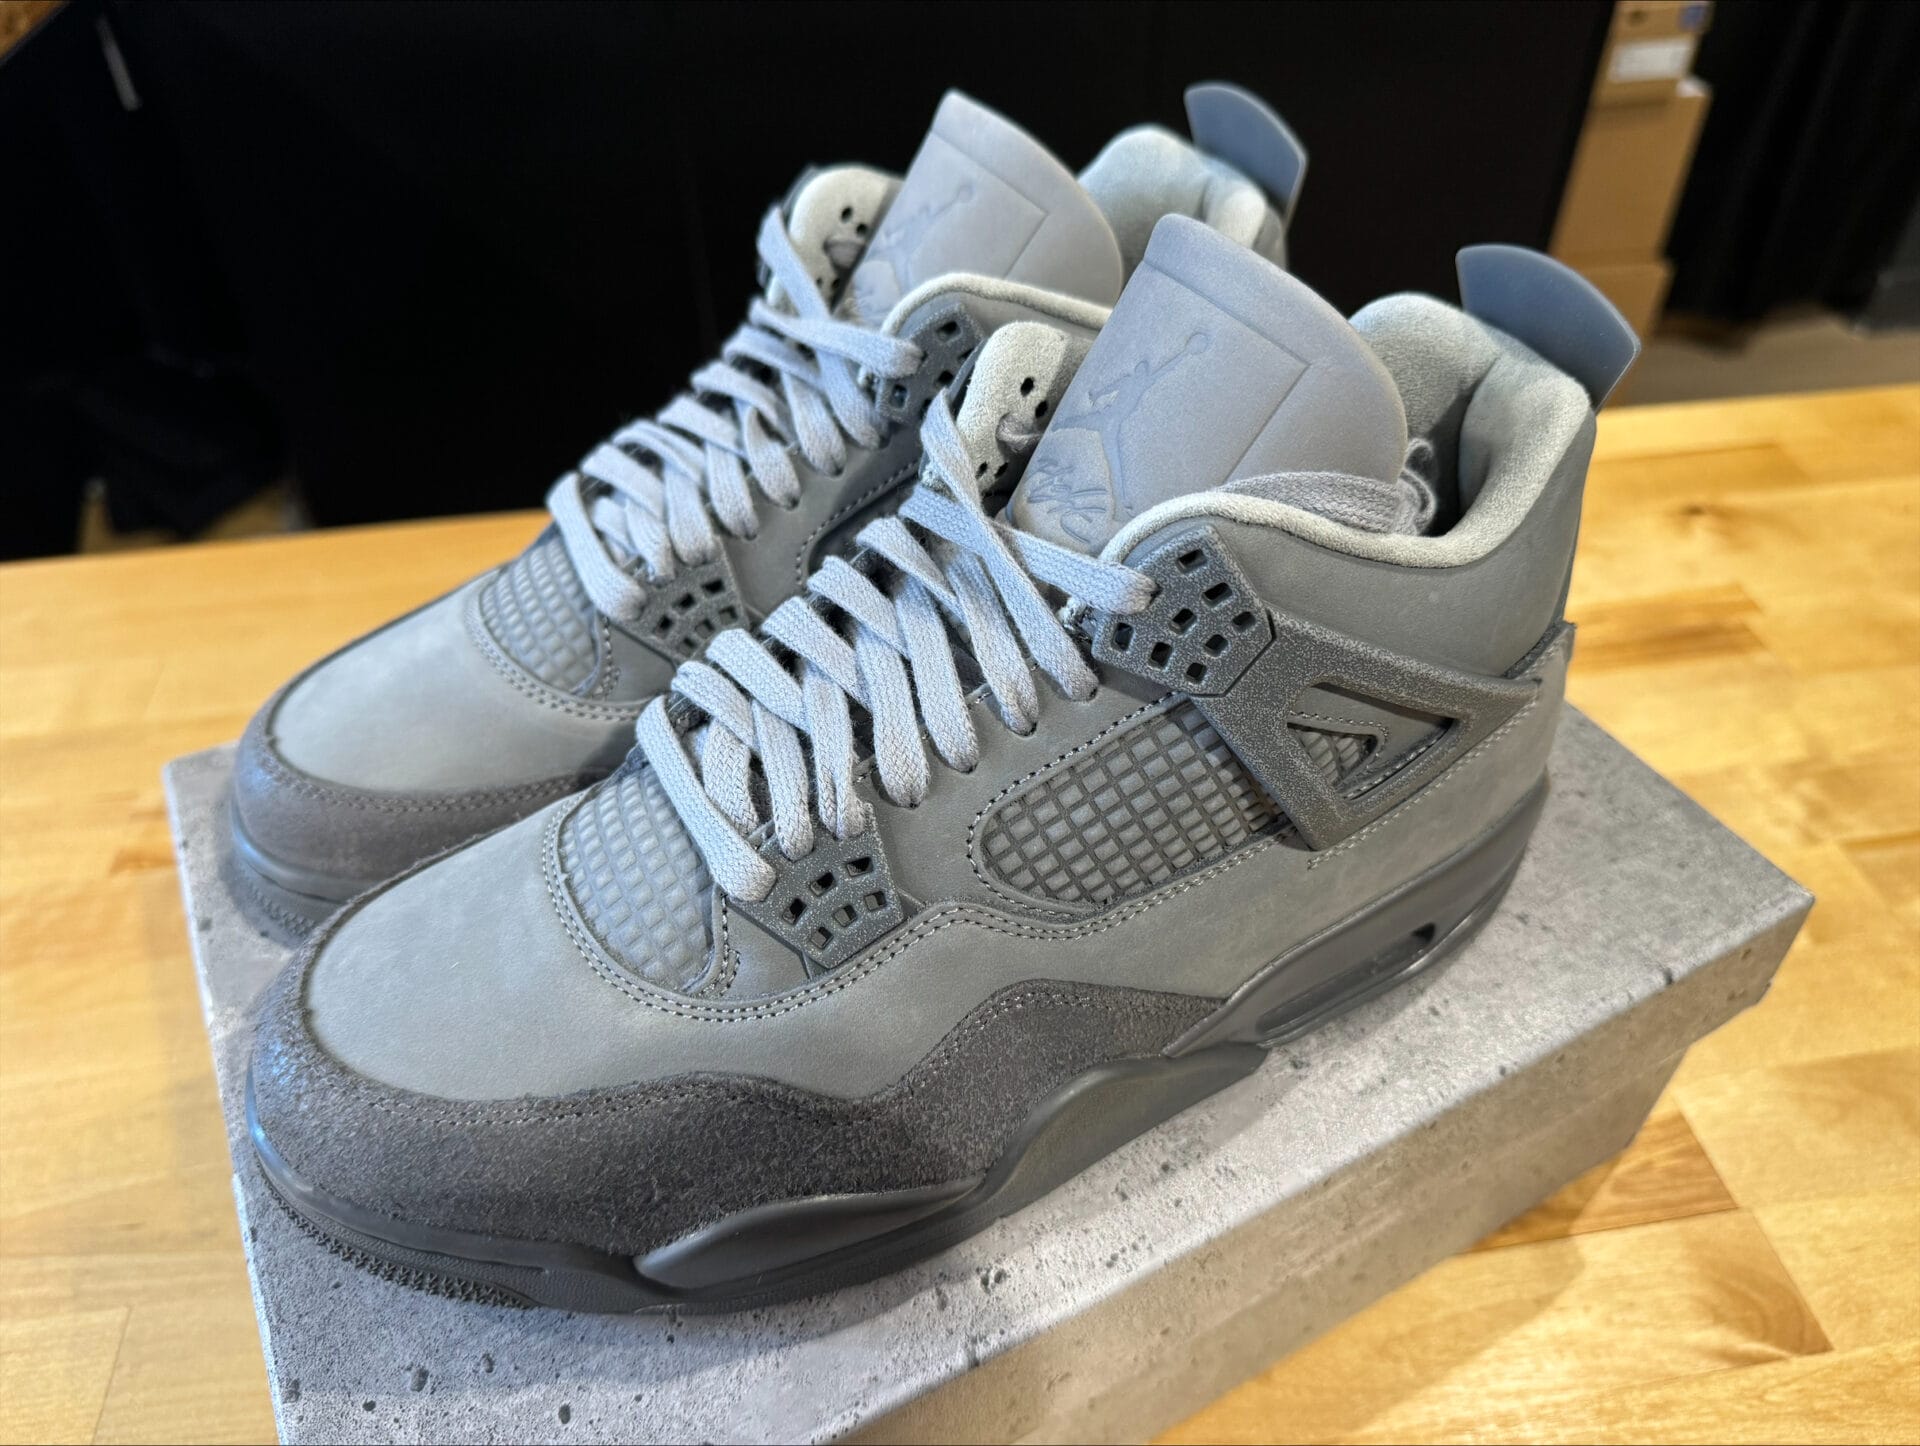 PHOTOS | Indy sneakerheads line up for the new Air Jordan 4